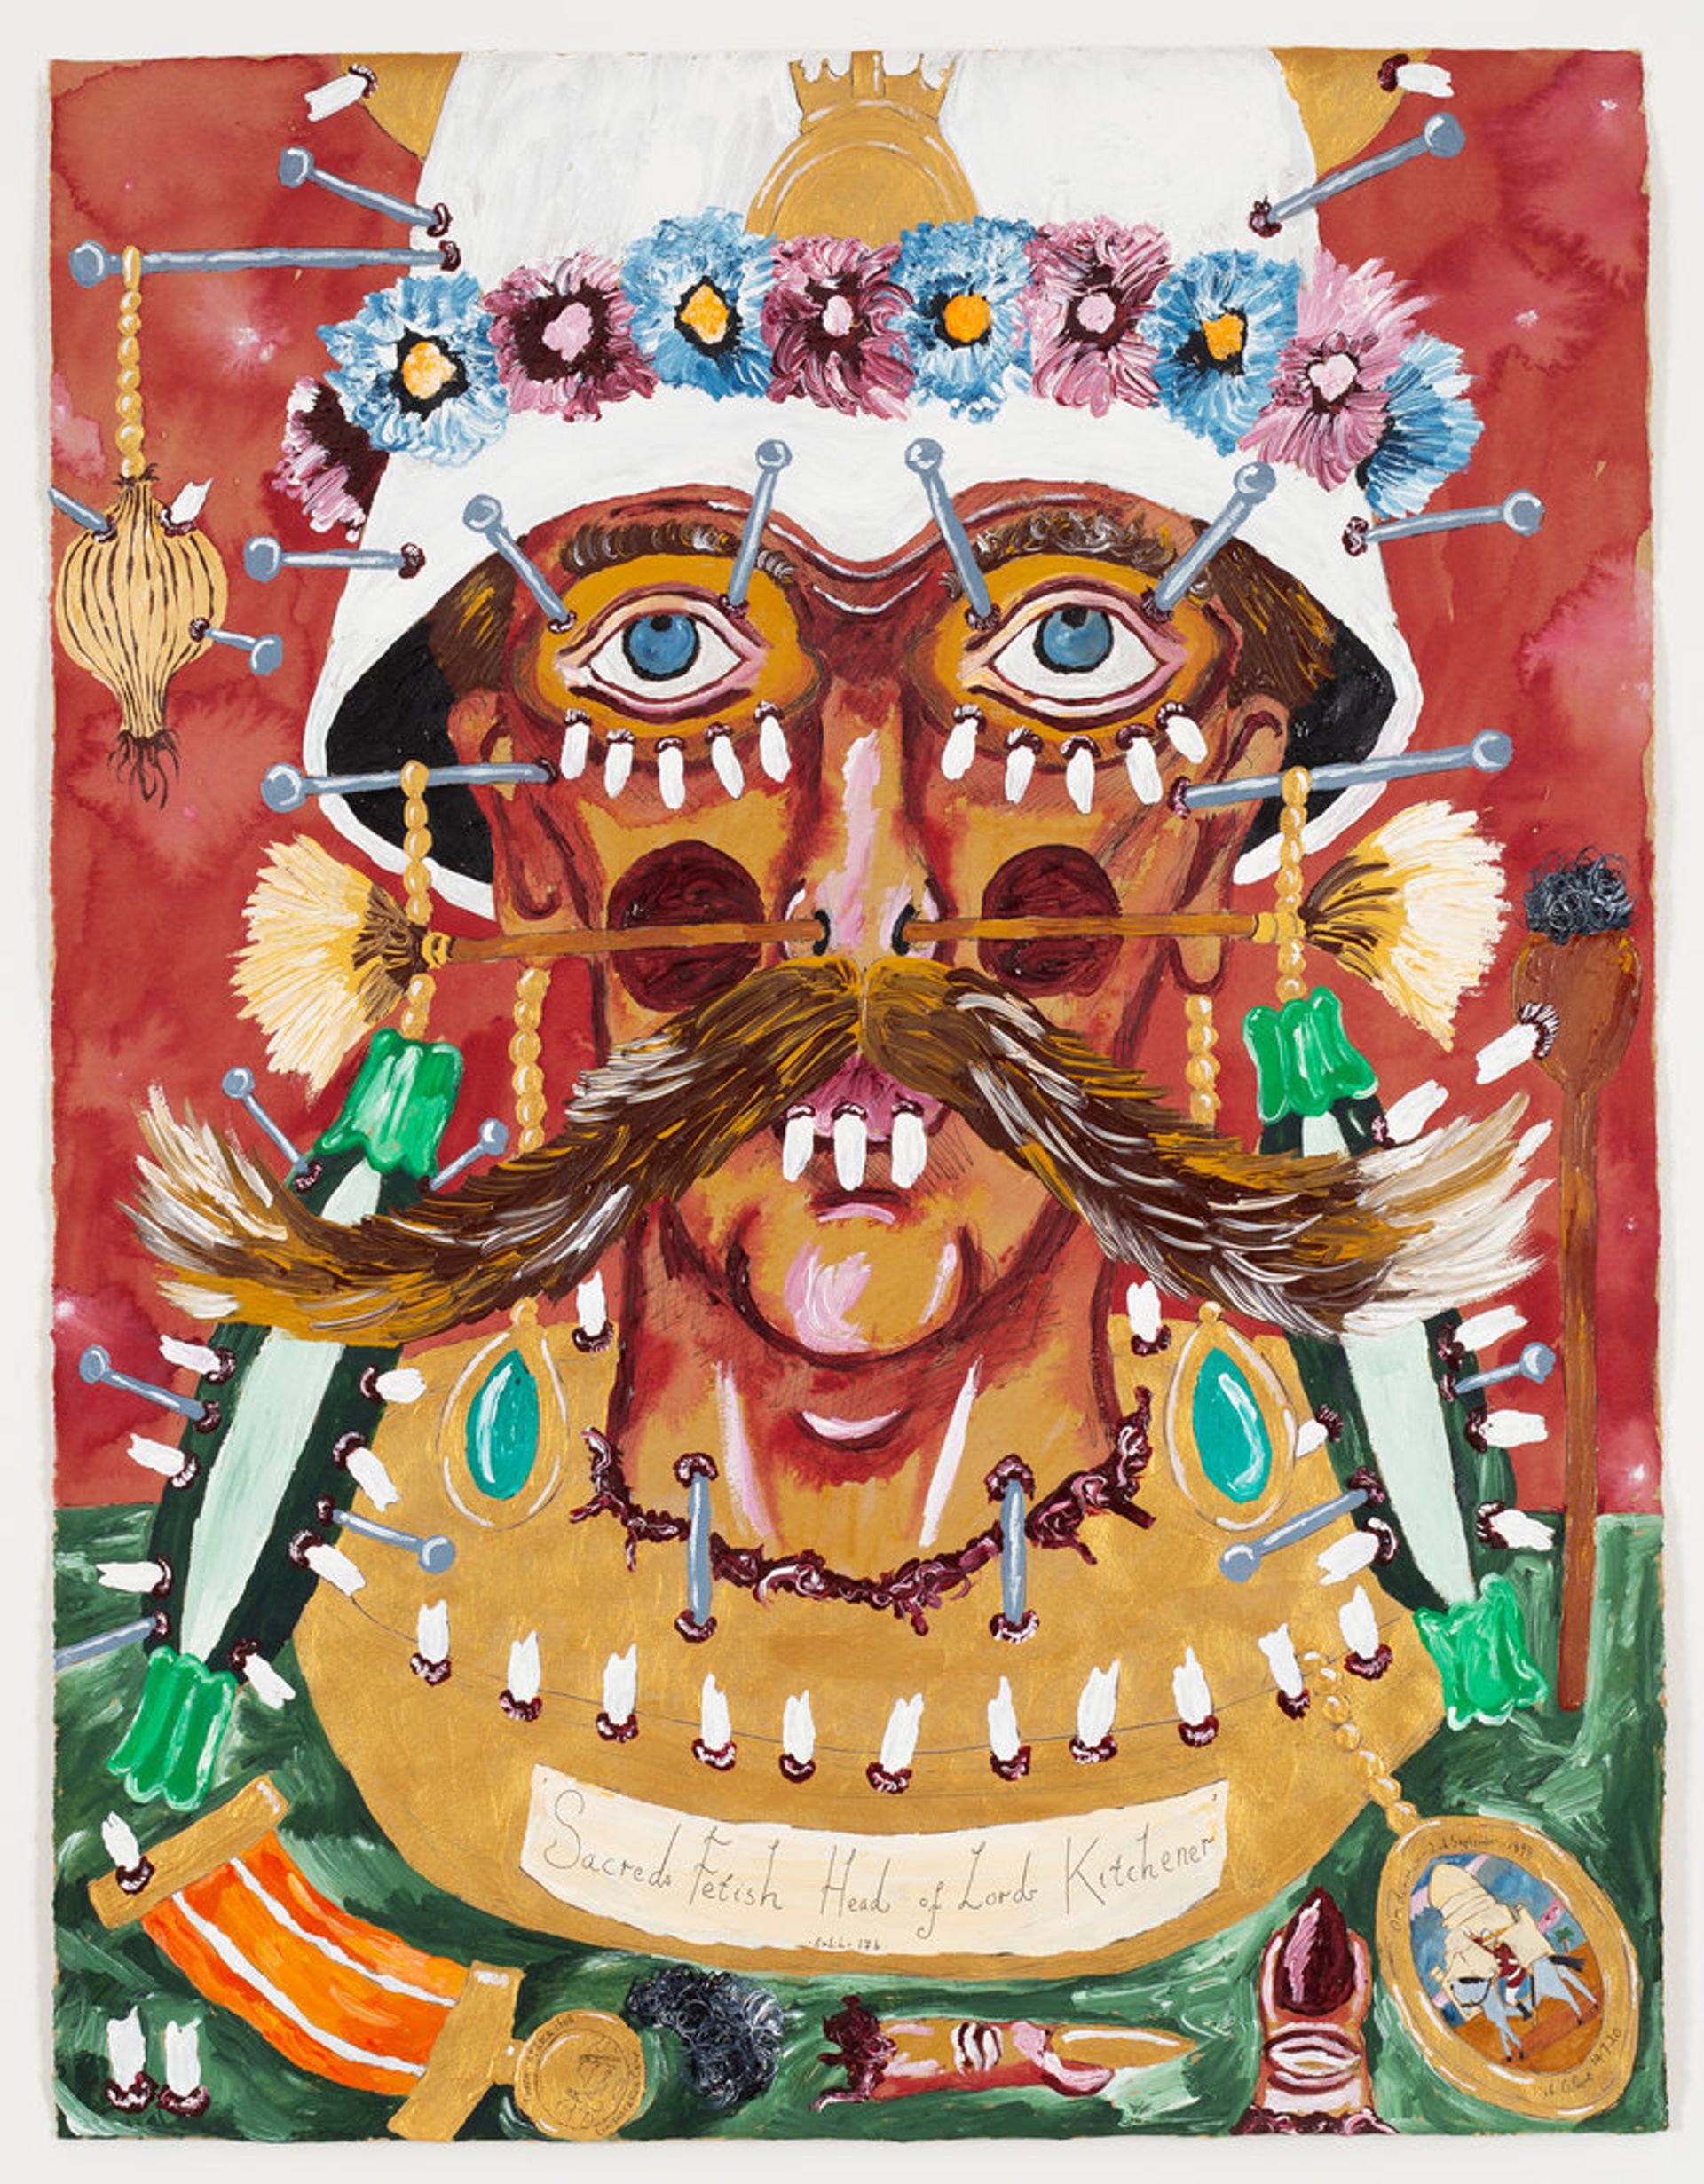 Andrew Gilbert, Sacred Fetish Head of Lord Kitchener, 2020, acrylic, fineliner and water colour on paper, 64 × 50 cm